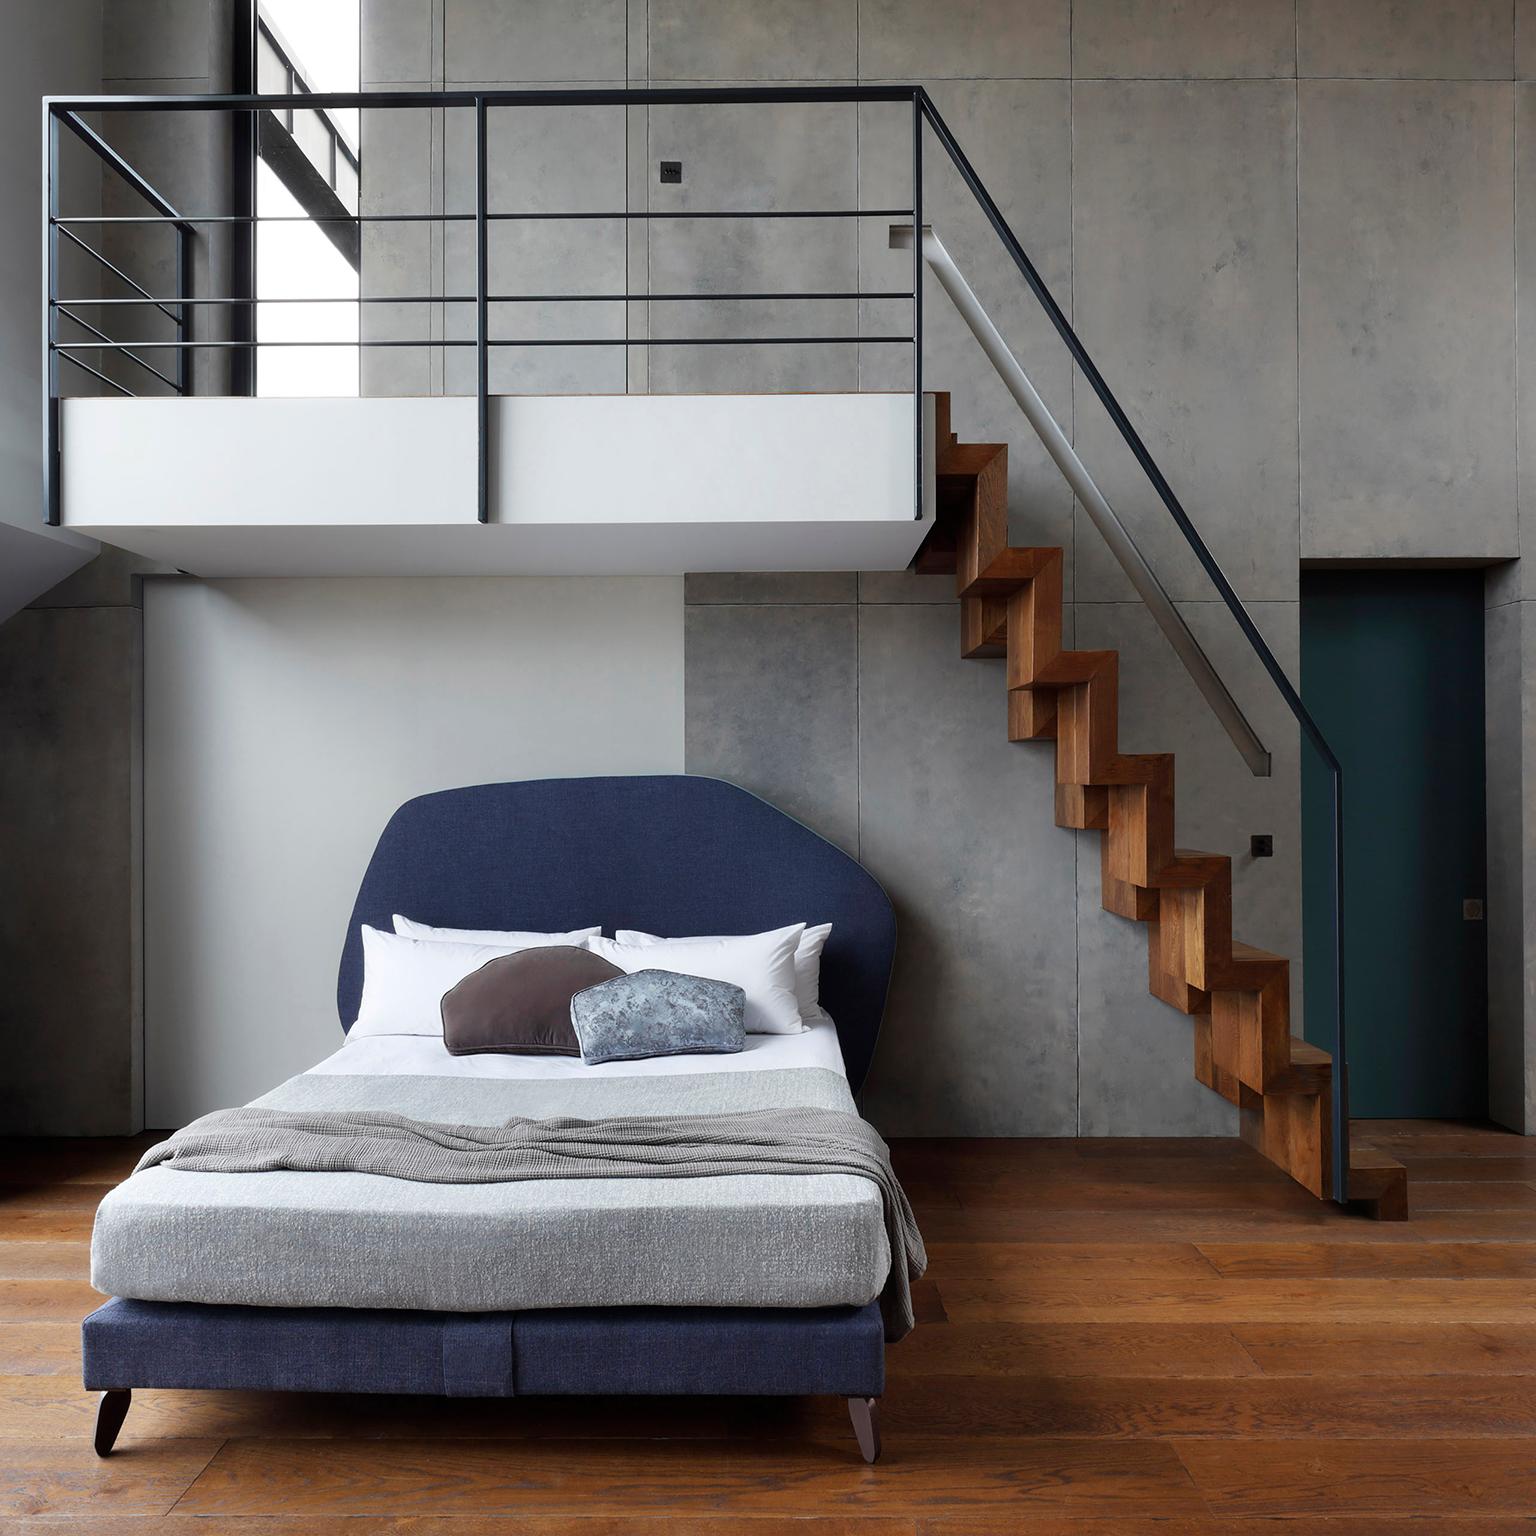 British furniture designer Tom Faulkner has incorporated his signature style into the design of the Savoir cloud bed. The design blends form and shape with timeless techniques in a true celebration of bespoke British Craft. Featuring two